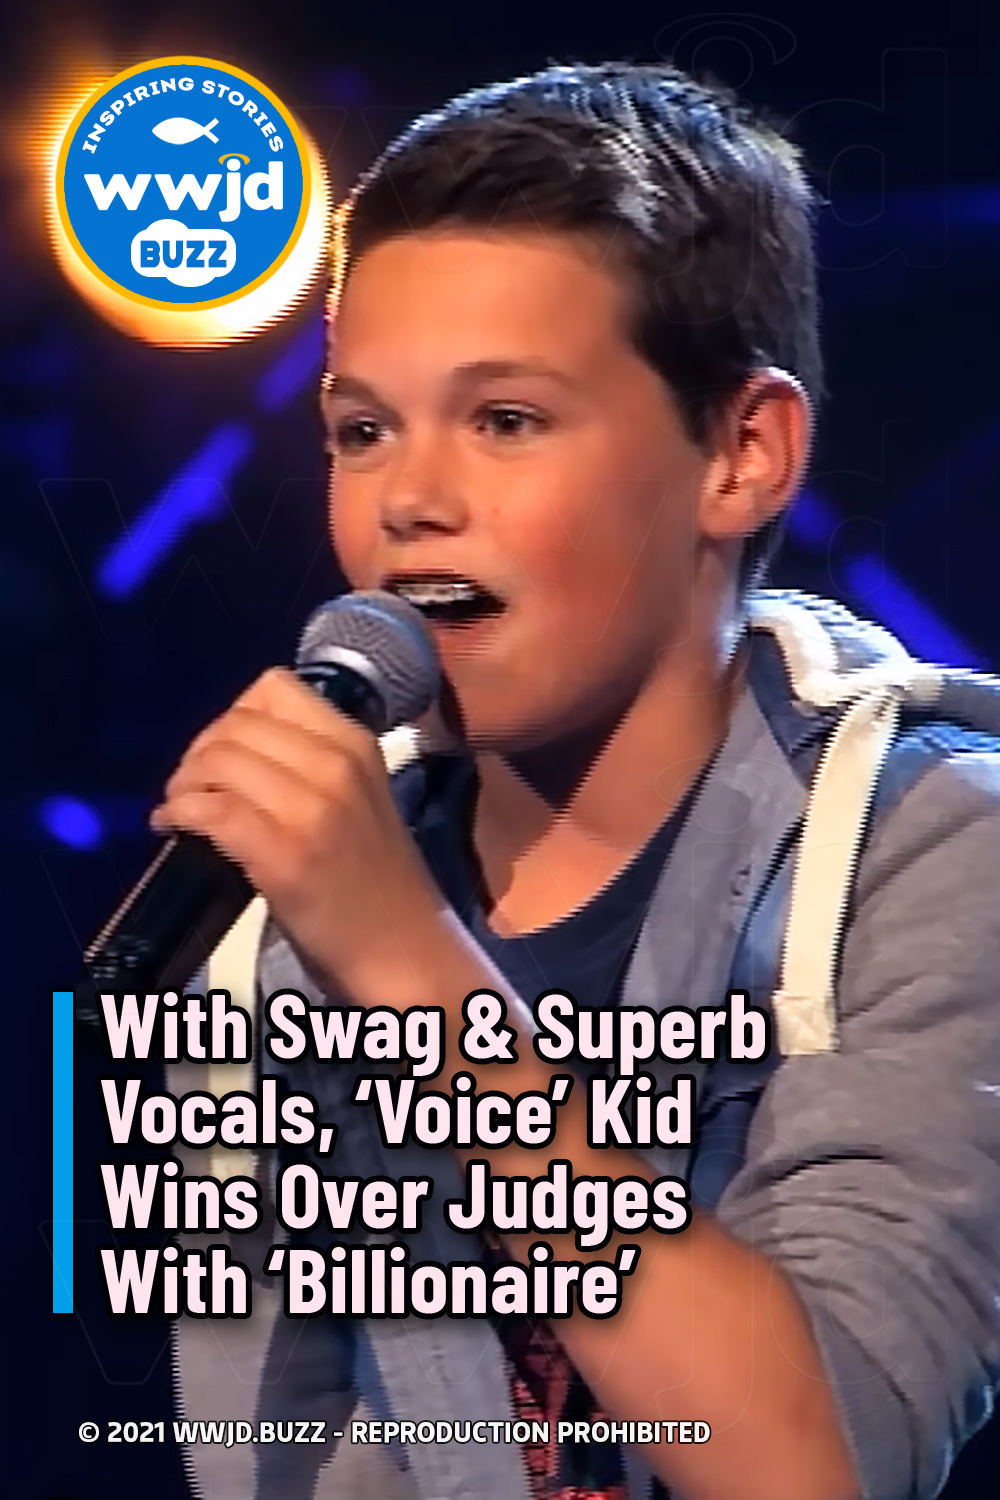 With Swag & Superb Vocals, \'Voice\' Kid Wins Over Judges With \'Billionaire\'